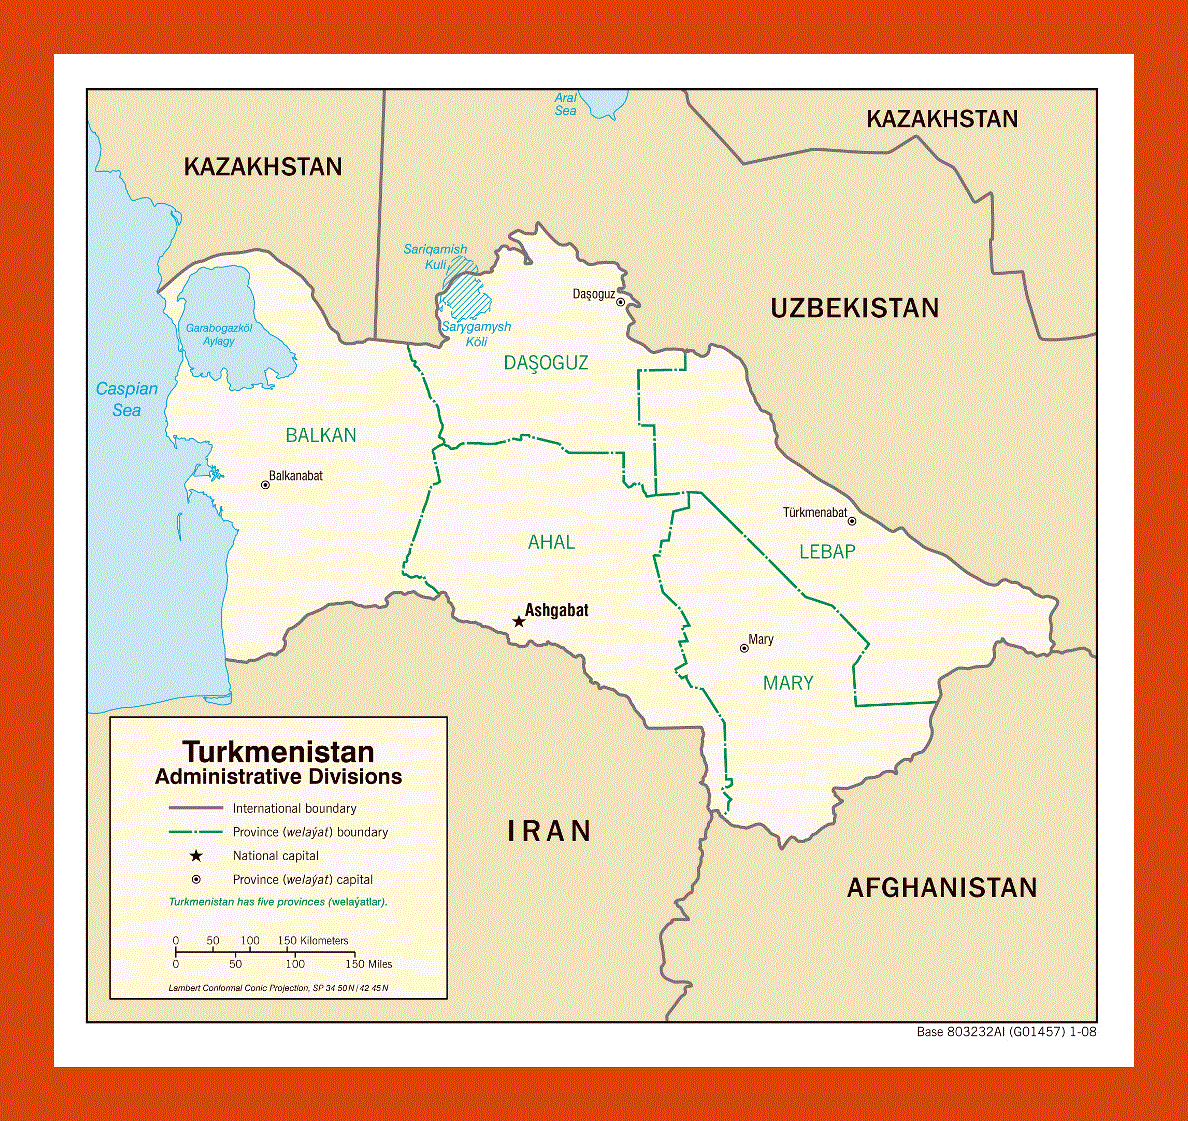 Administrative divisions map of Turkmenistan - 2008